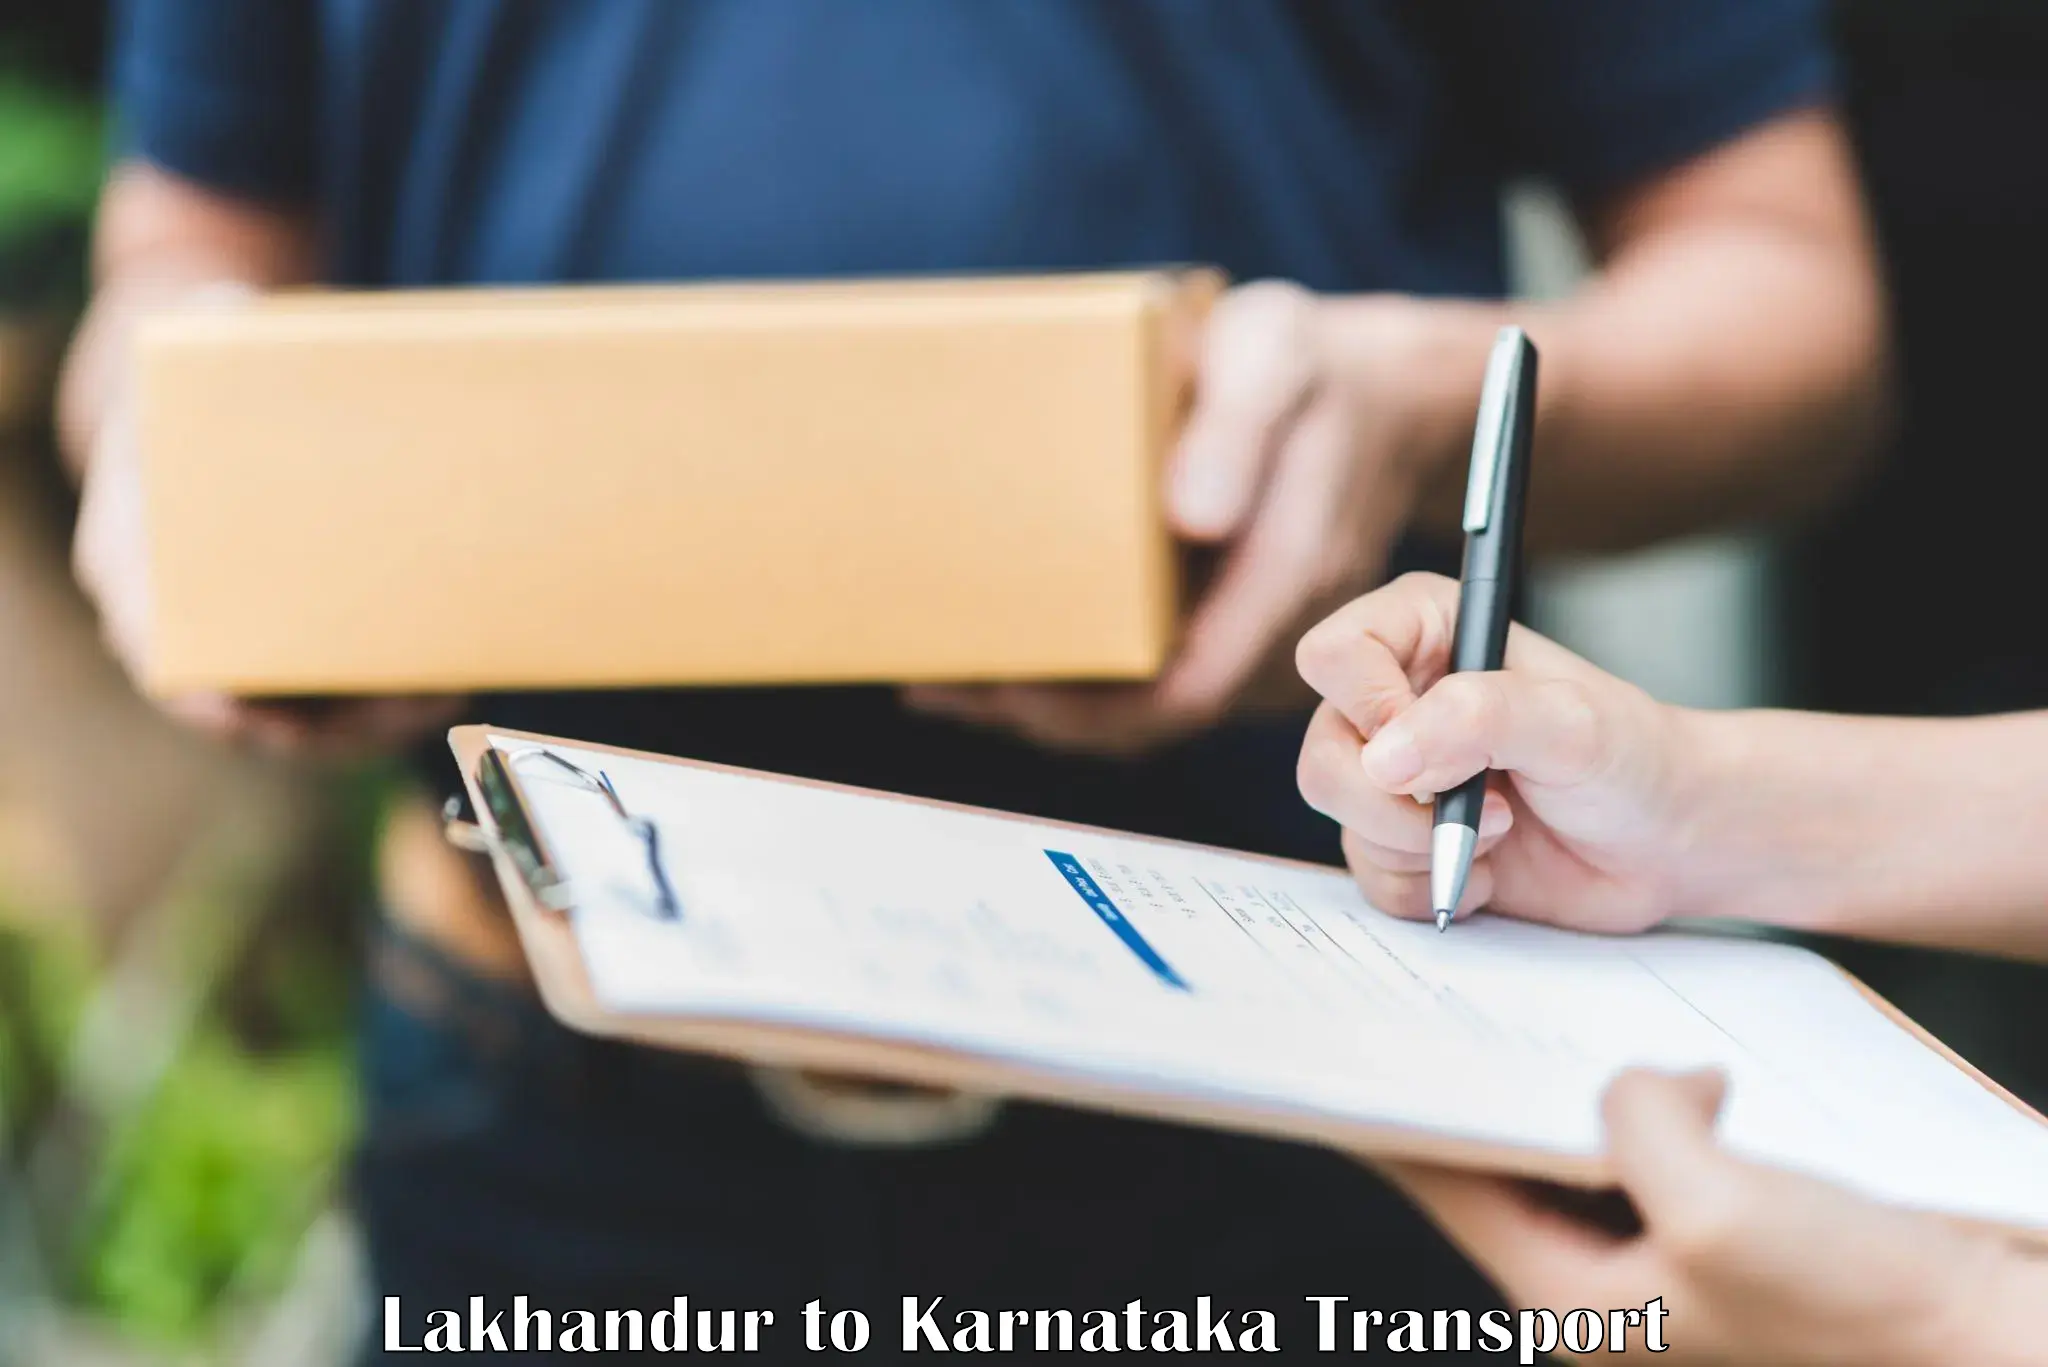 Online transport booking Lakhandur to Channapatna